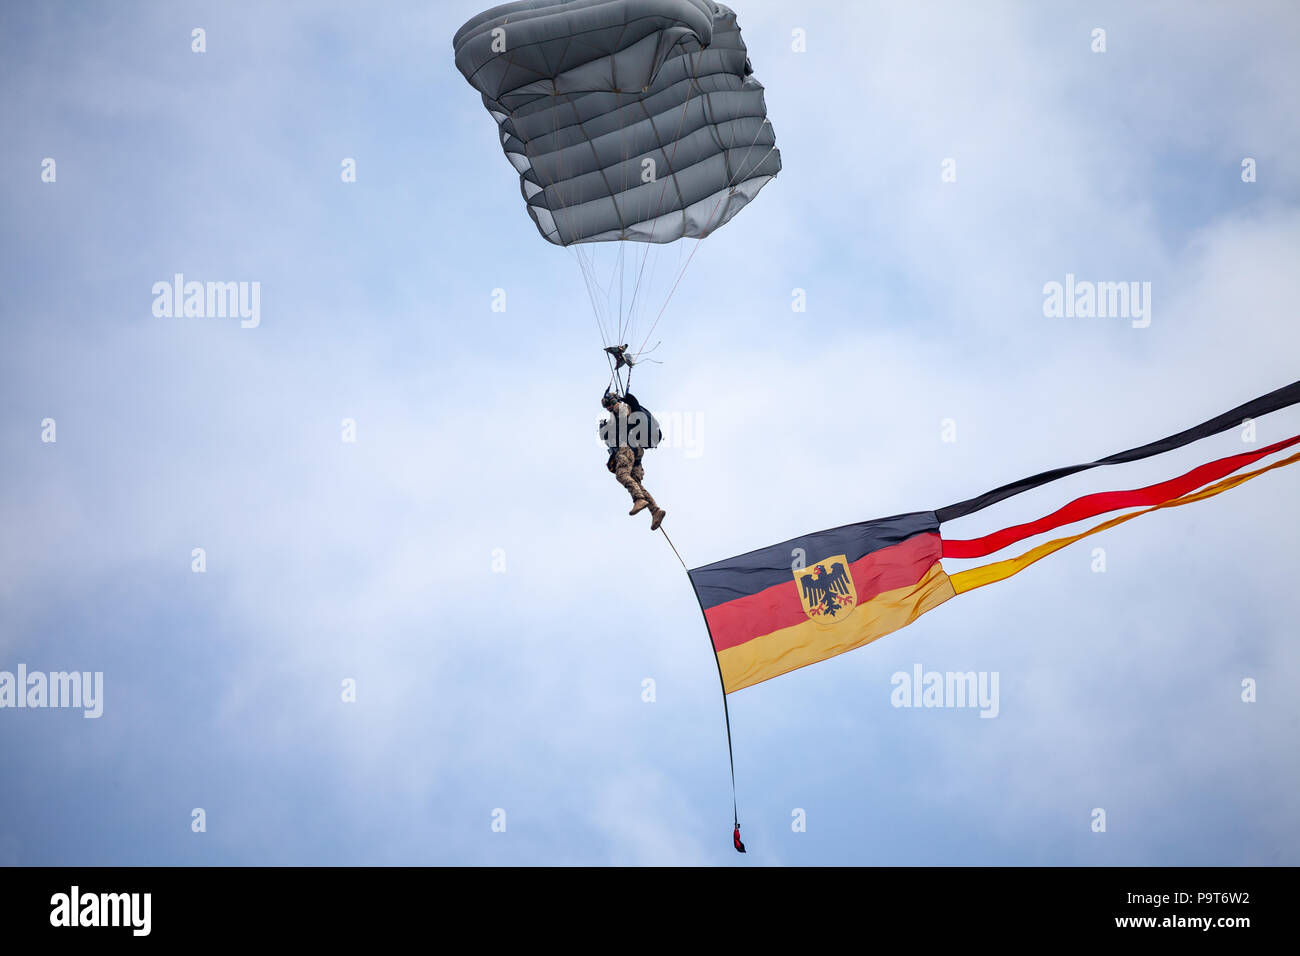 FELDKIRCHEN / GERMANY - JUNE 9, 2018: Paratrooper from Bundeswehr, german army lands on an open day on day of the Bundeswehr in Feldkirchen Stock Photo